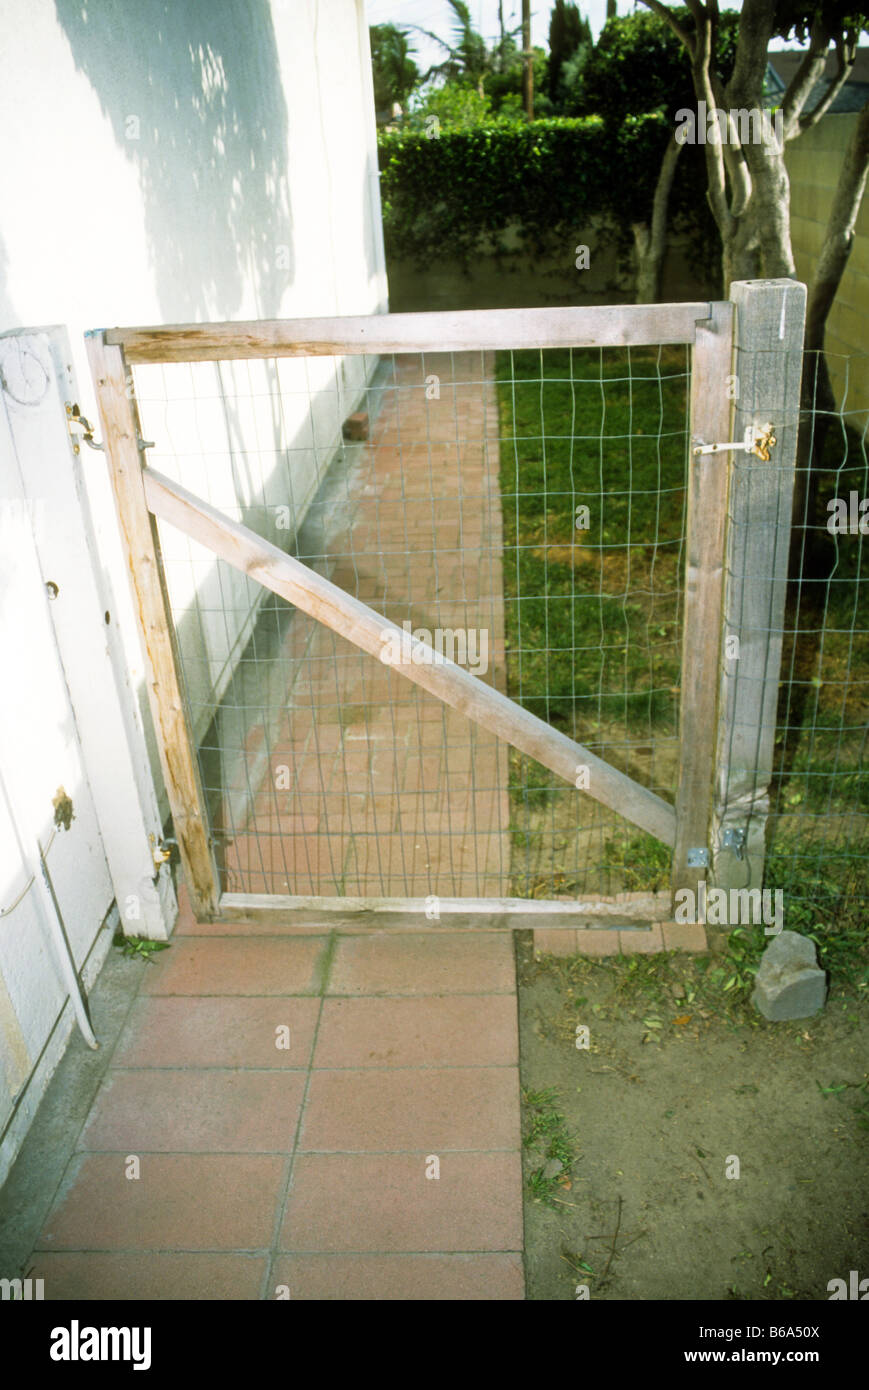 Wooden gate with metal screen mesh and diagonal support. Stock Photo